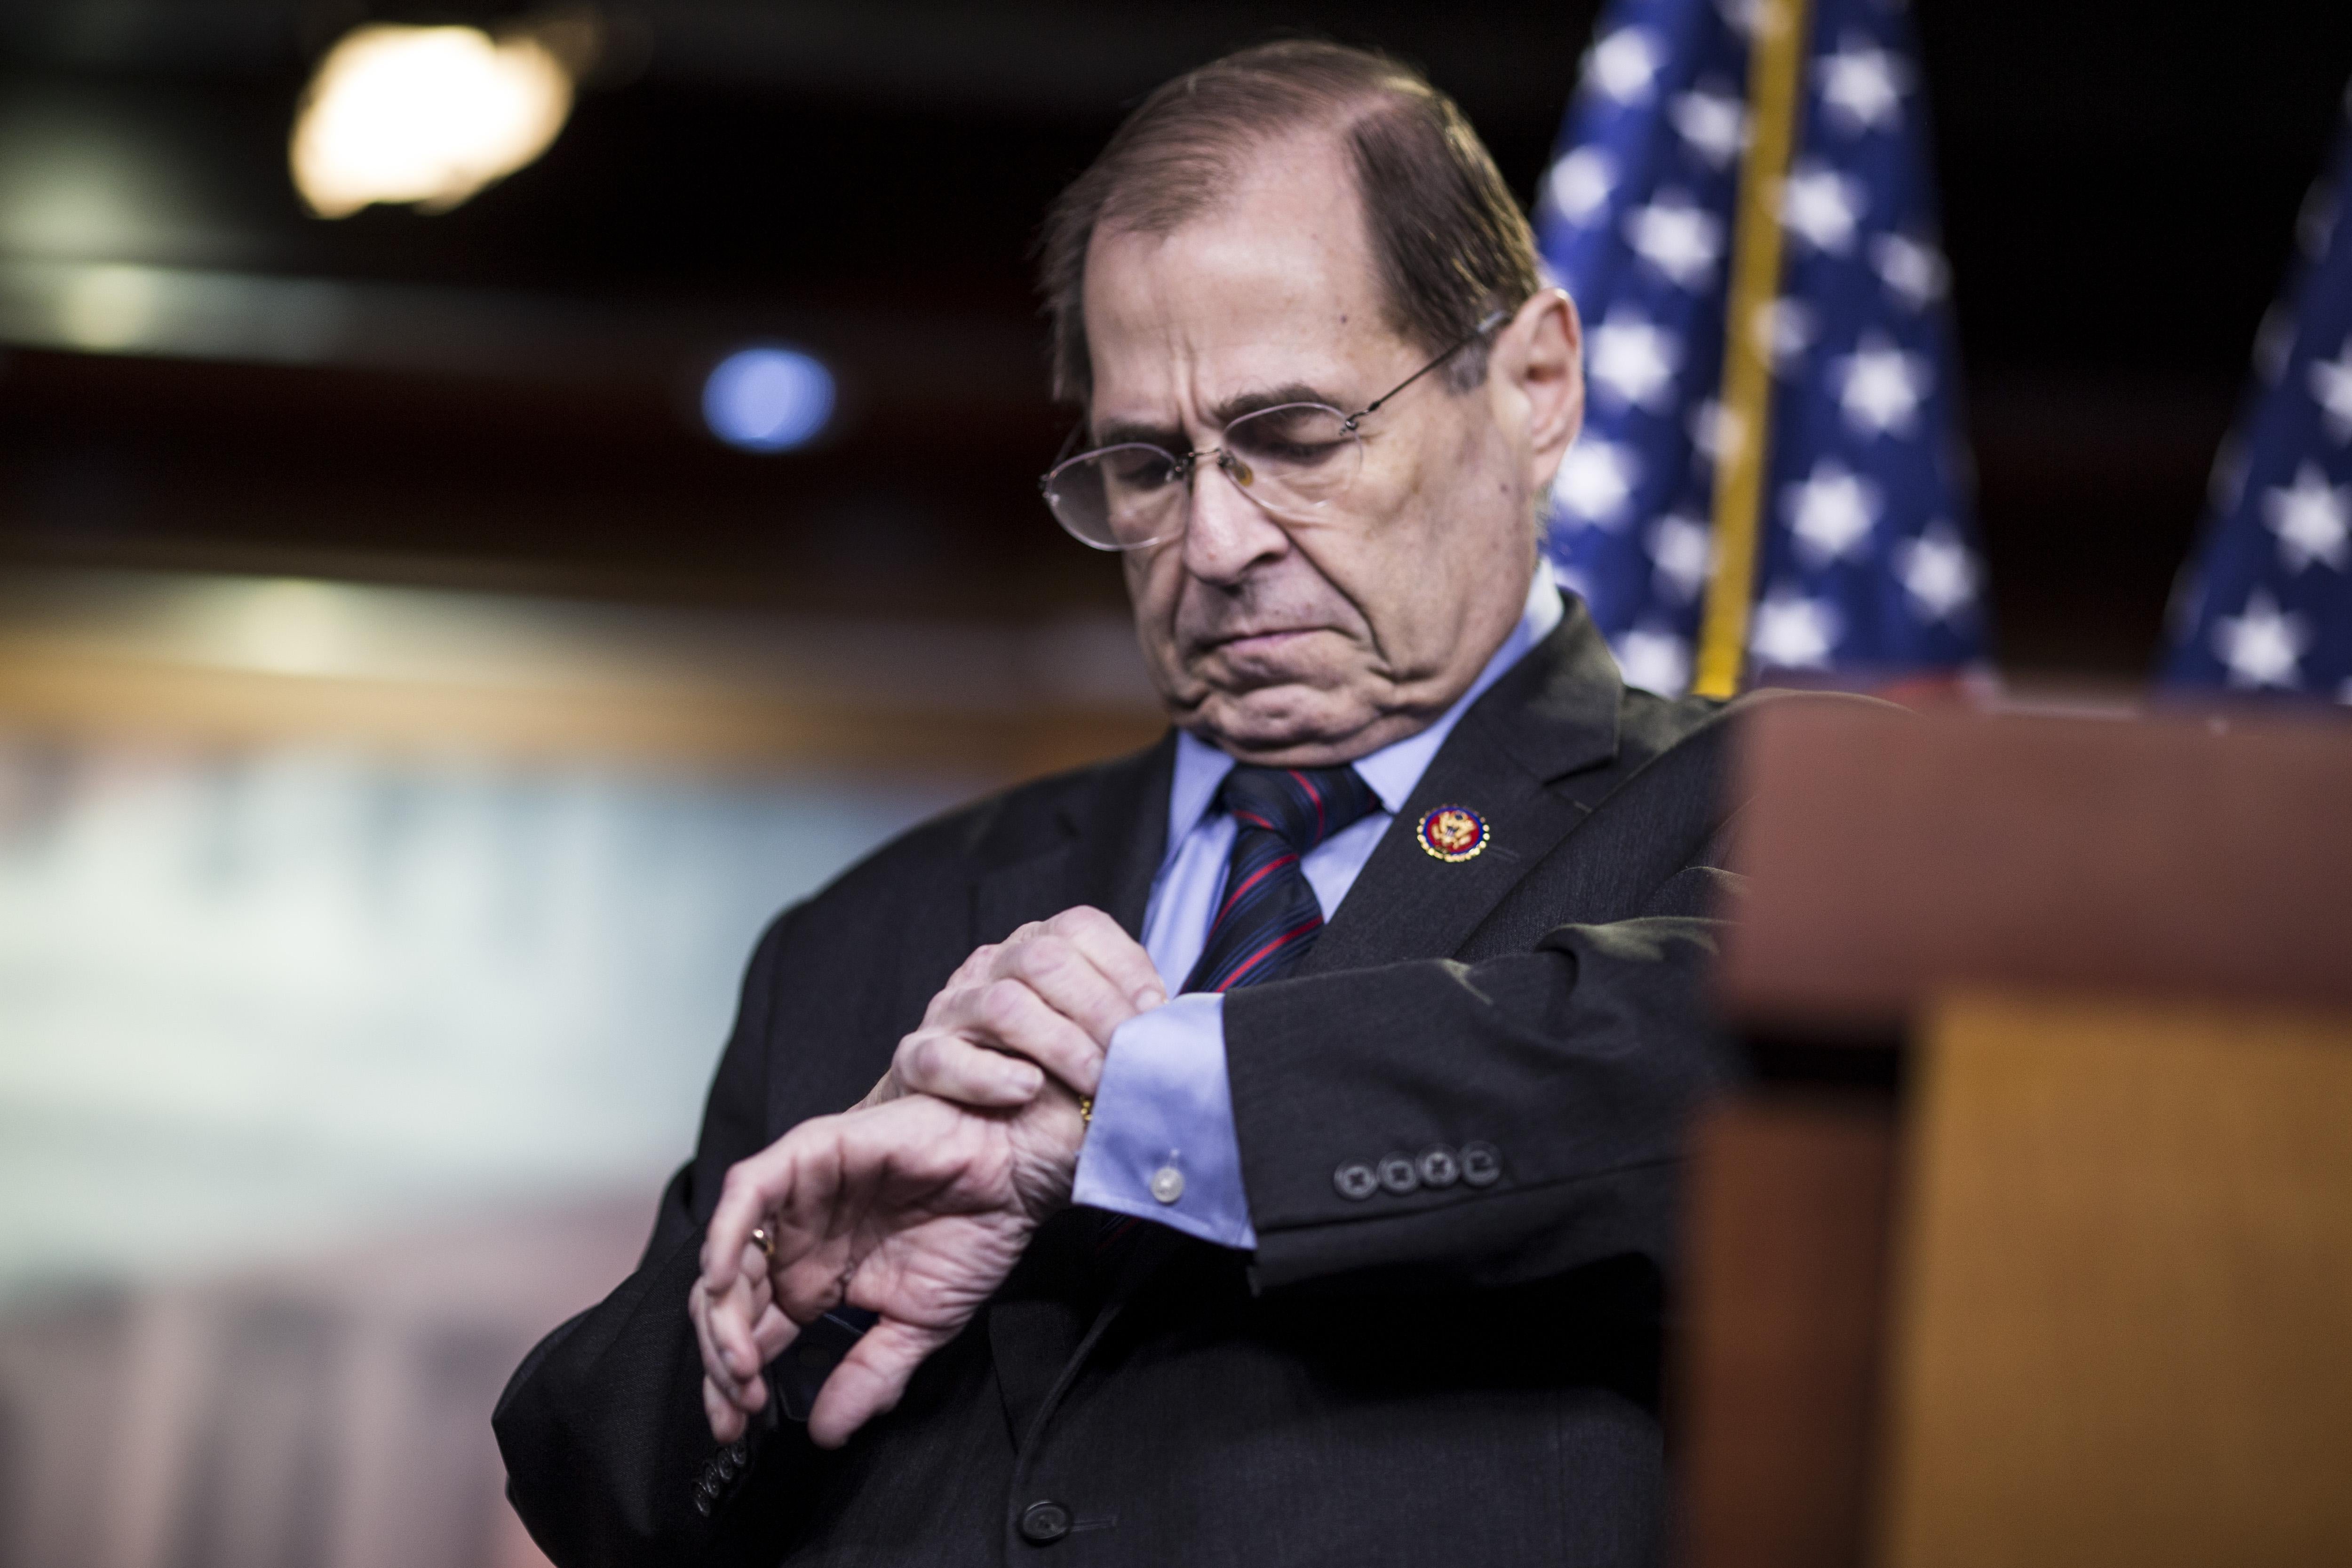 Jerry Nadler looks at his watch as he steps down from a podium.